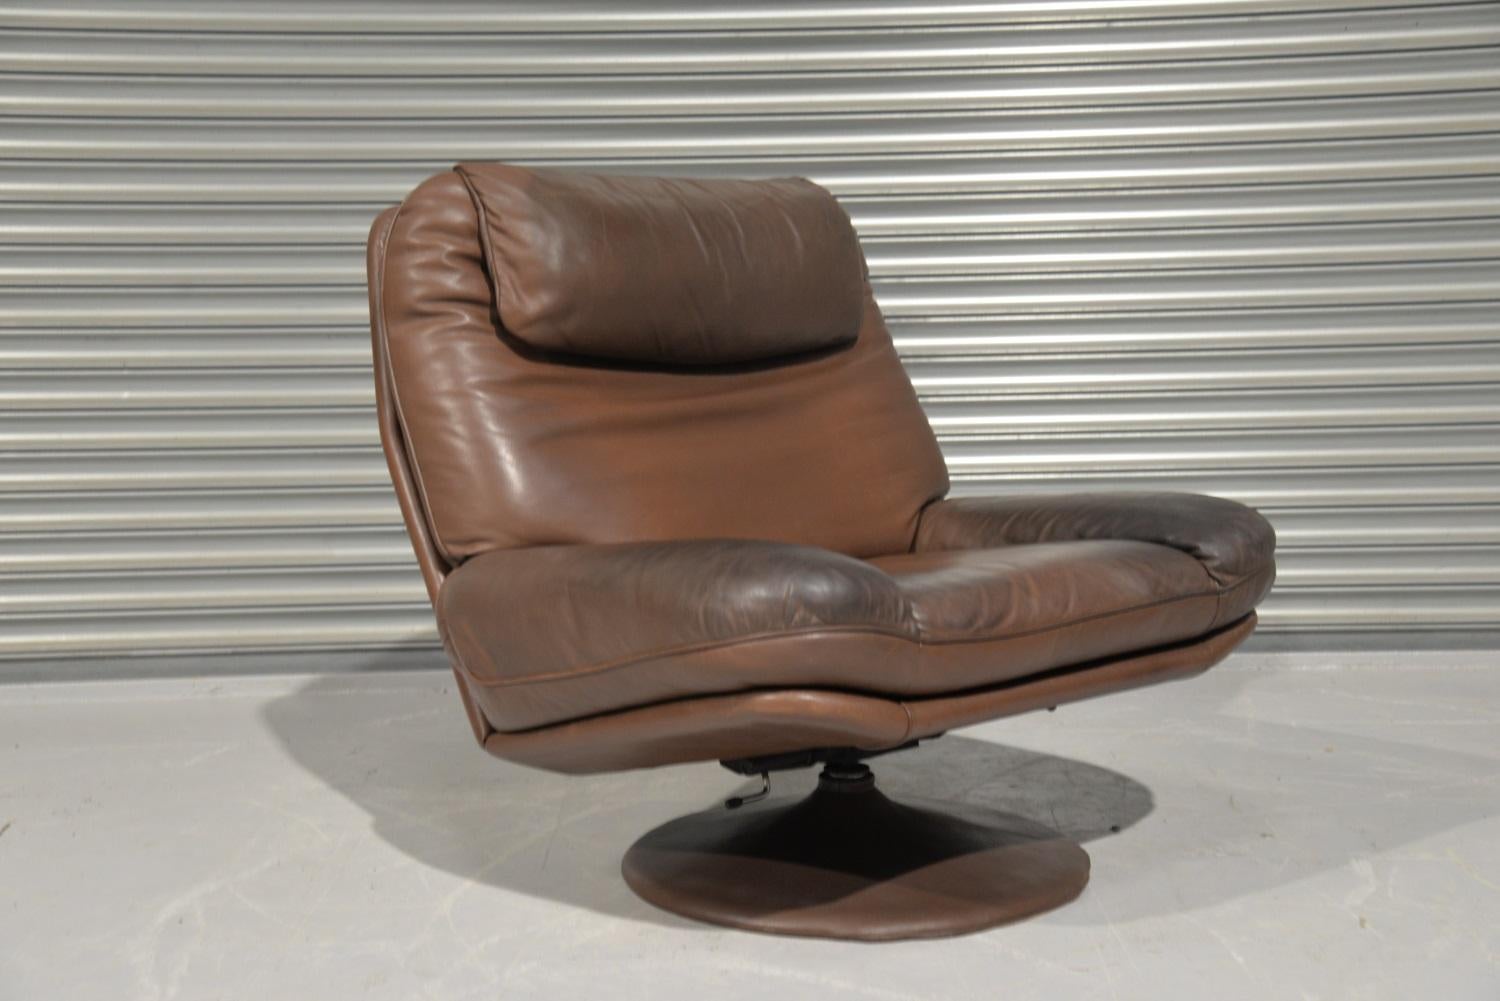 Vintage De Sede Leather Swivel Armchair and Ottoman, Switzerland, 1980s For Sale 5